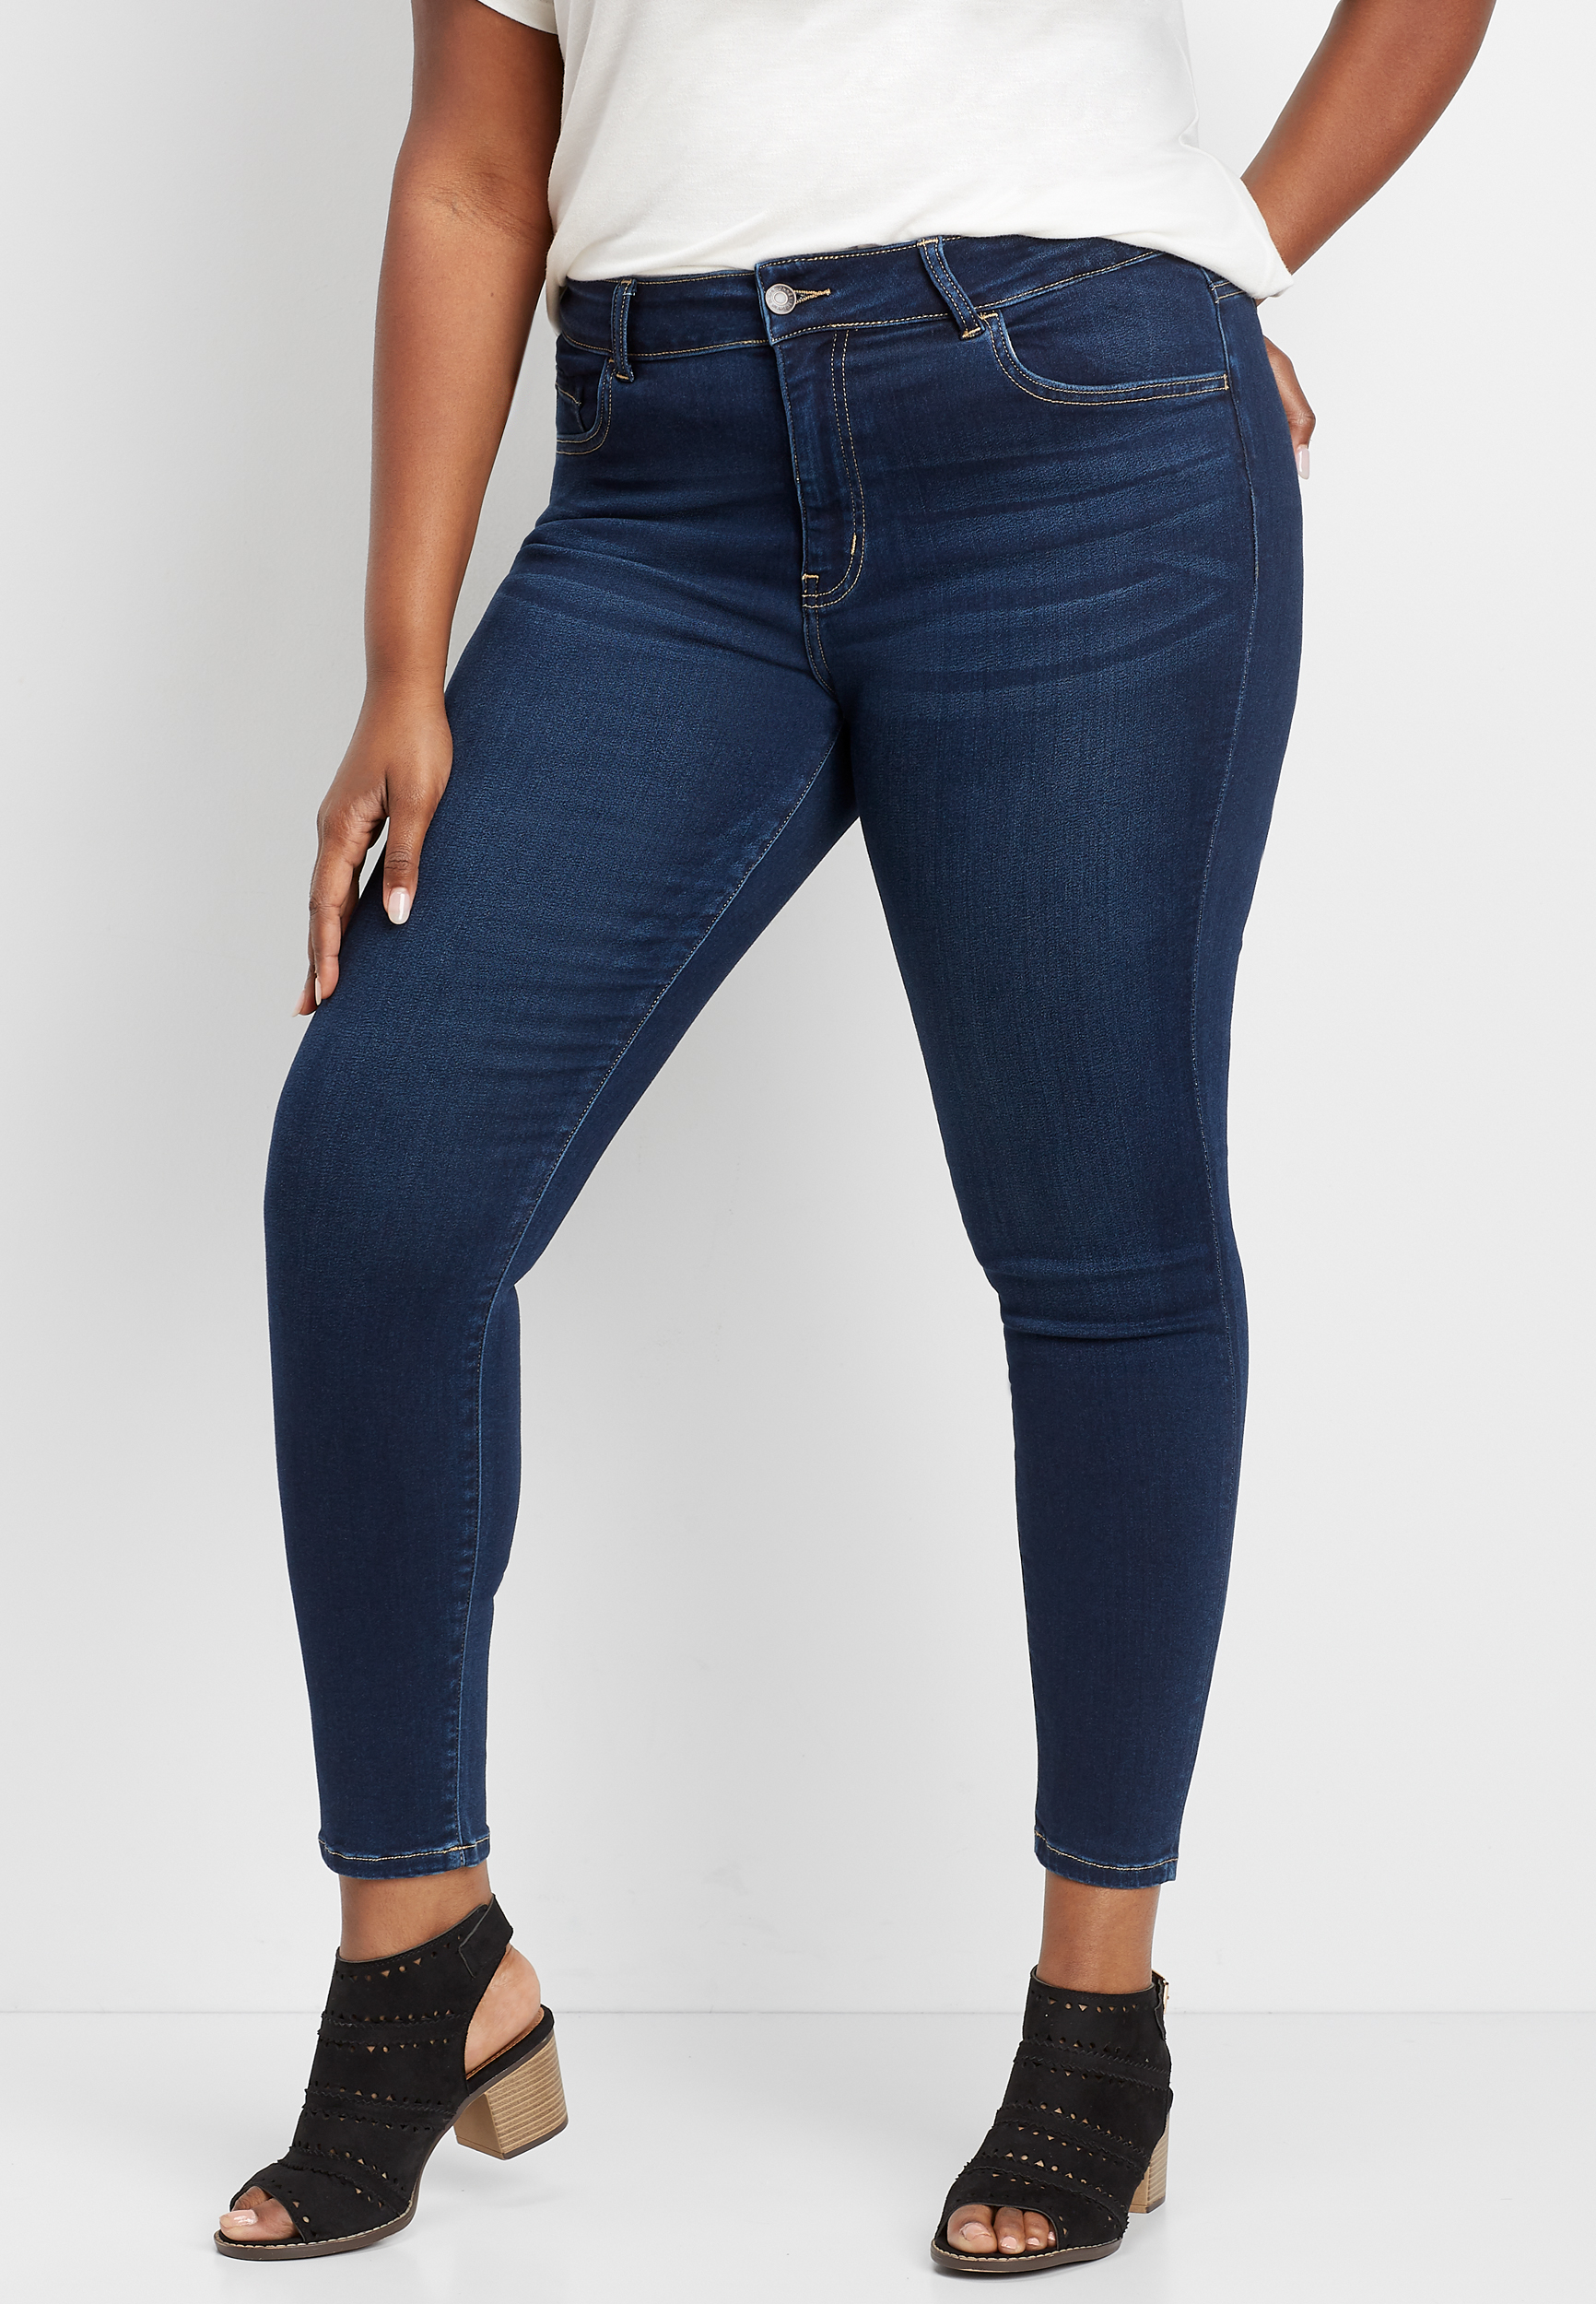 Plus Size Flying Monkey™ High Rise Dark Super Soft Skinny Jean | maurices